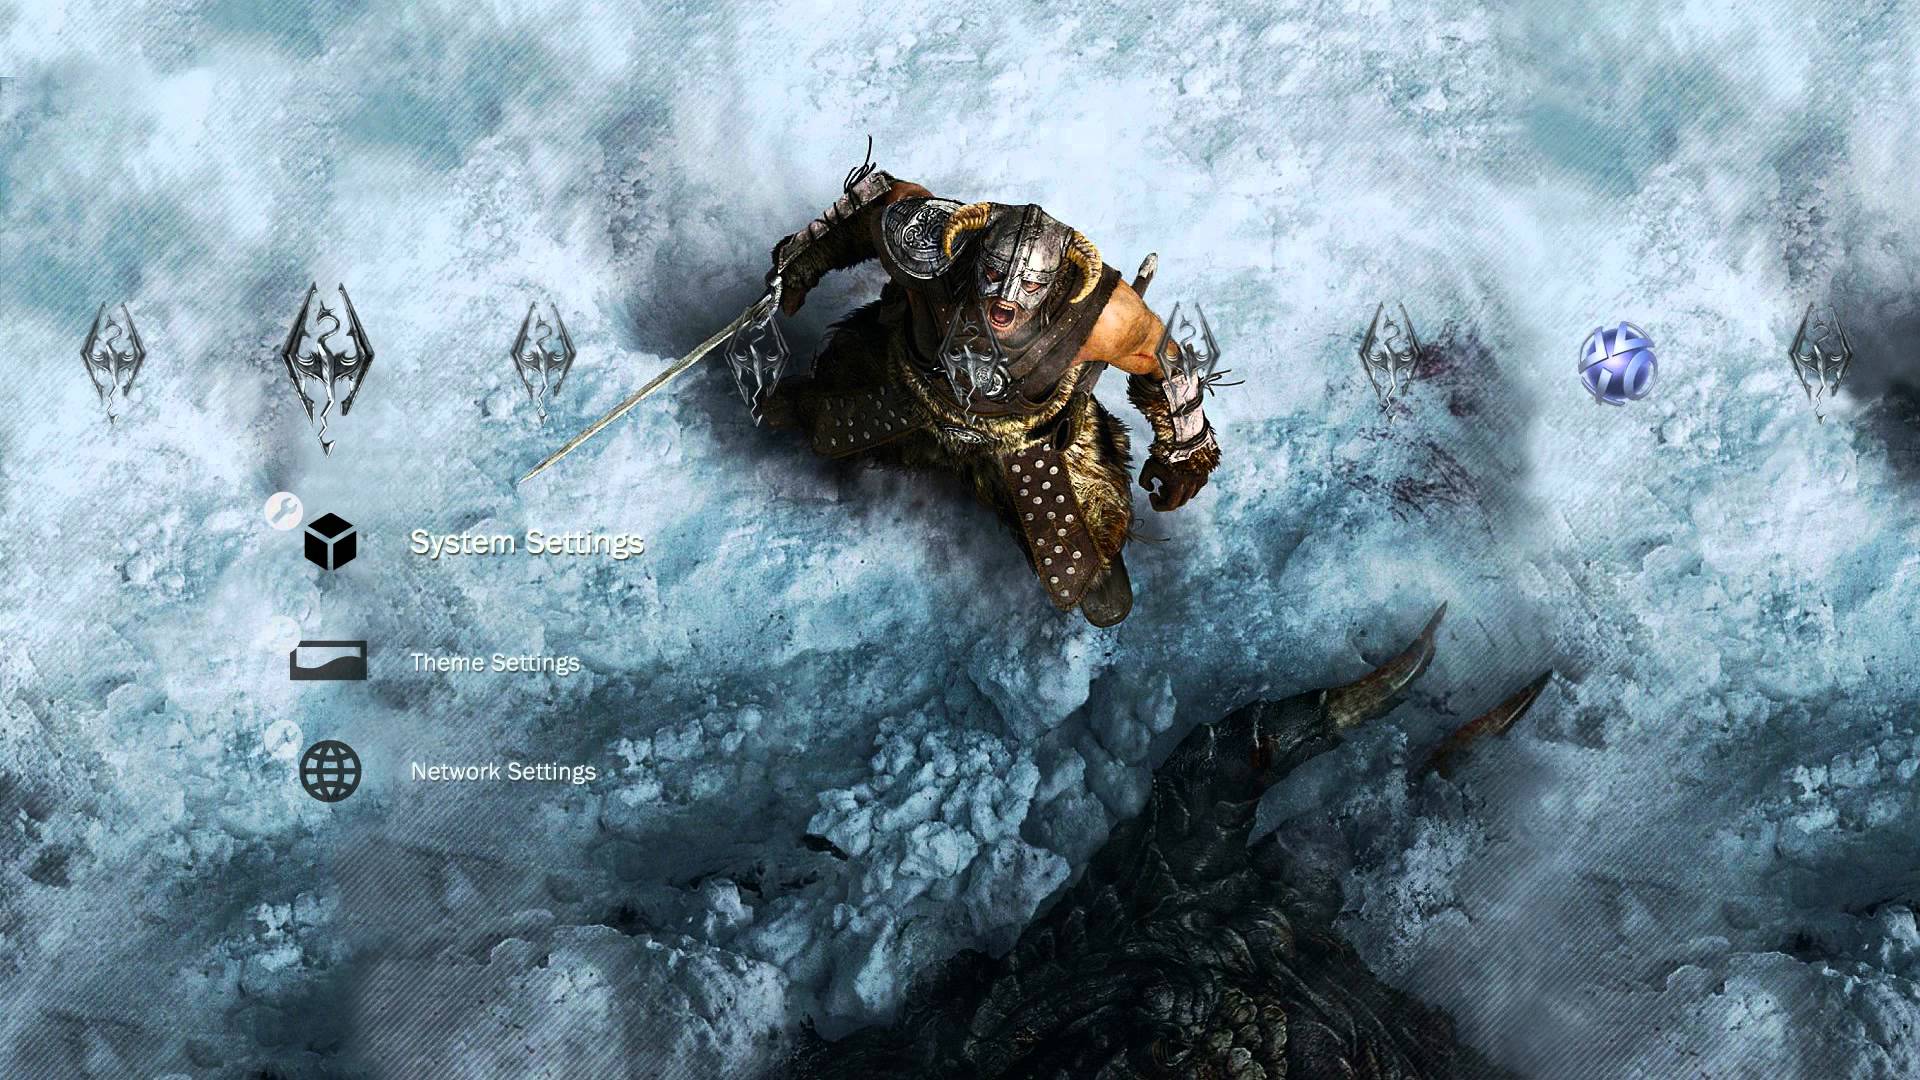 TES V: Skyrim HD Wallpaper + PS3 Theme Download Links Included